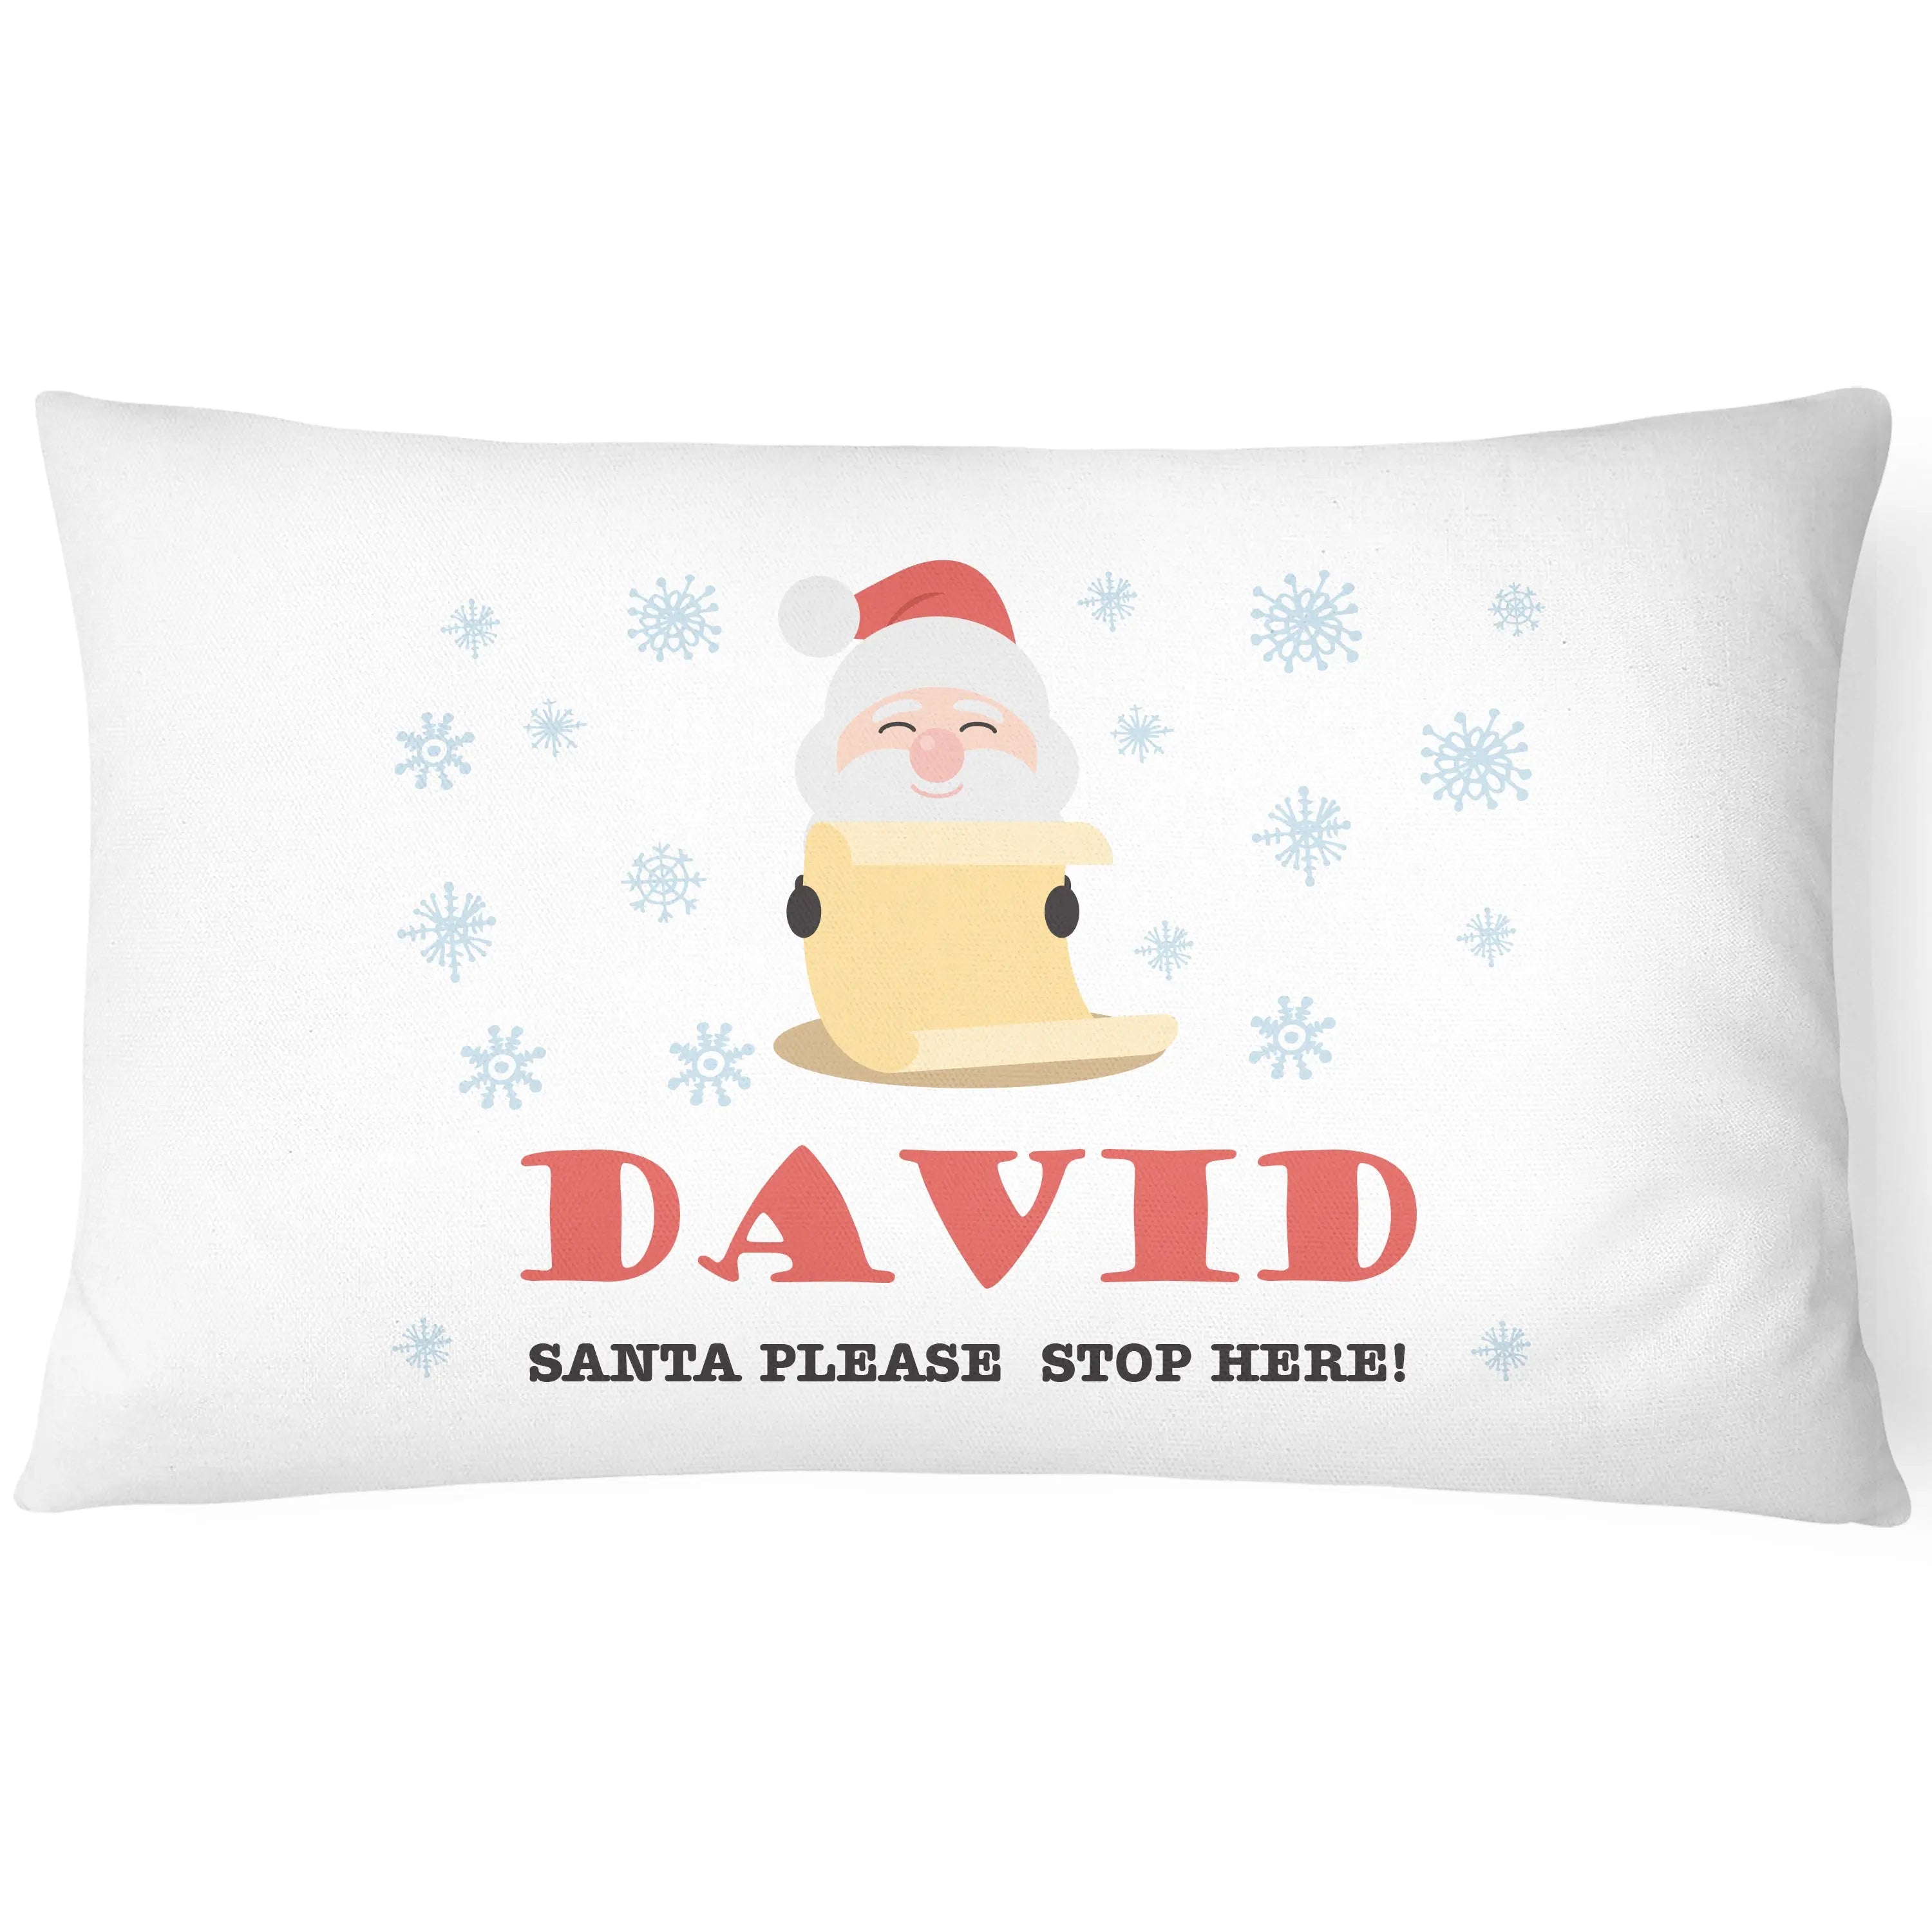 Christmas Pillowcase for Kids - Personalise With Any Name - Santa